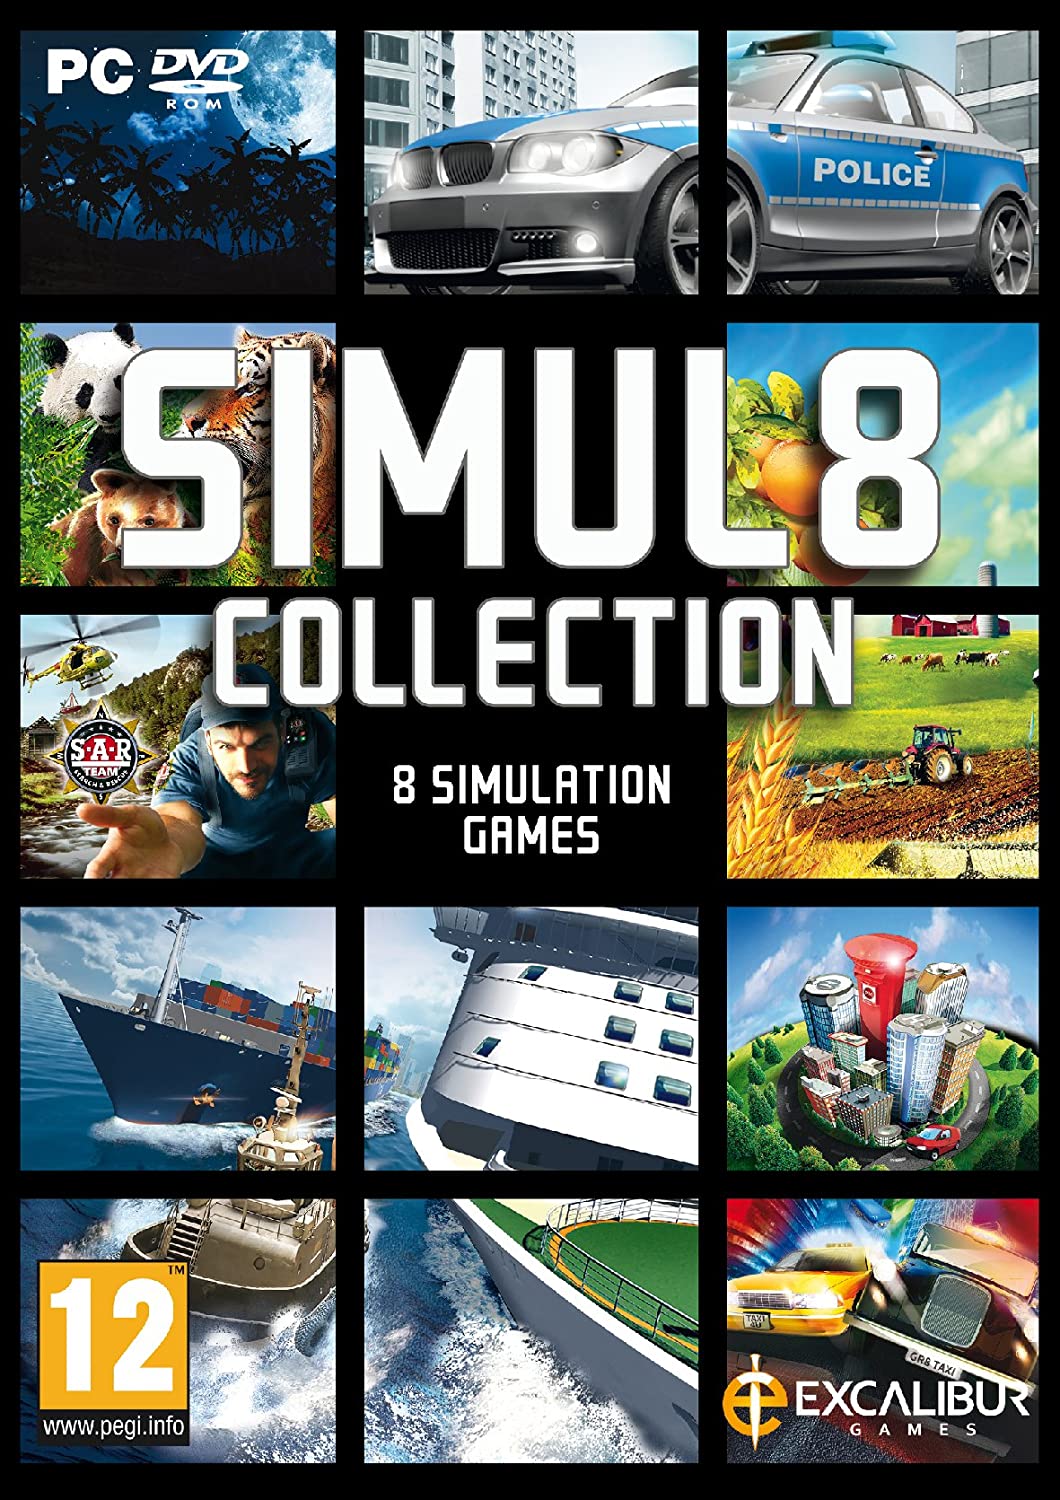 Simul8 Collection (PC DVD)